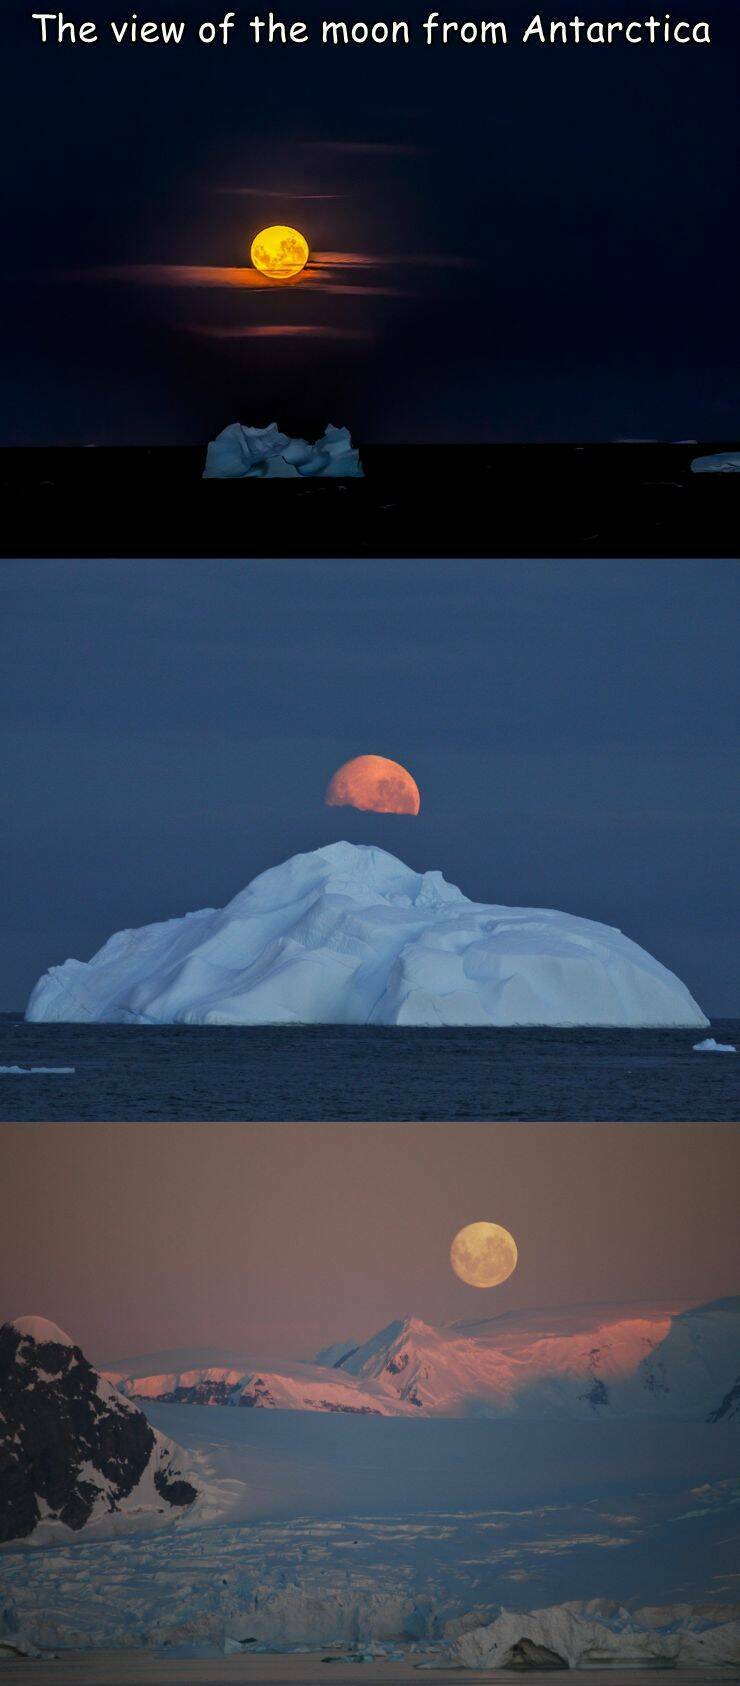 daily dose - moon - The view of the moon from Antarctica